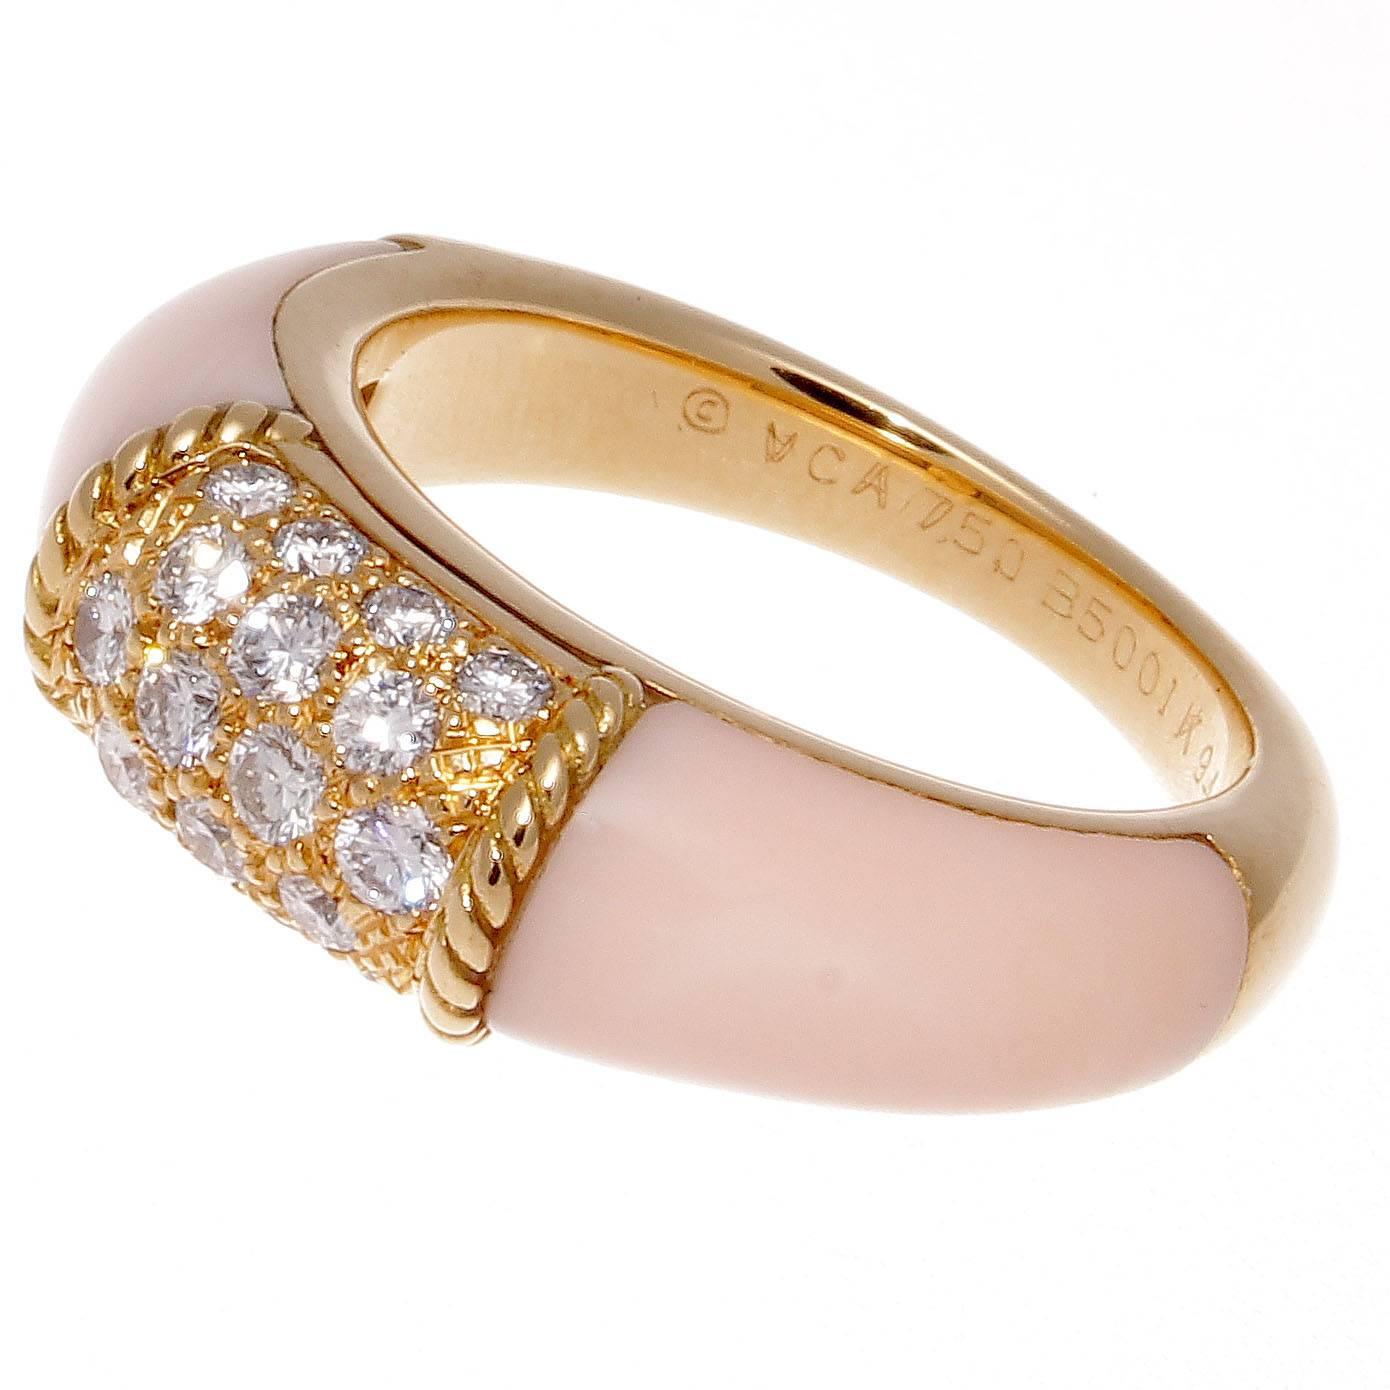 The classic Philippine ring from Van Cleef & Arpels. Designed with pave set diamonds in textured 18k yellow gold accented by glowing angel skin coral cascading down either side. Signed VCA, numbered and stamped with French hallmarks.